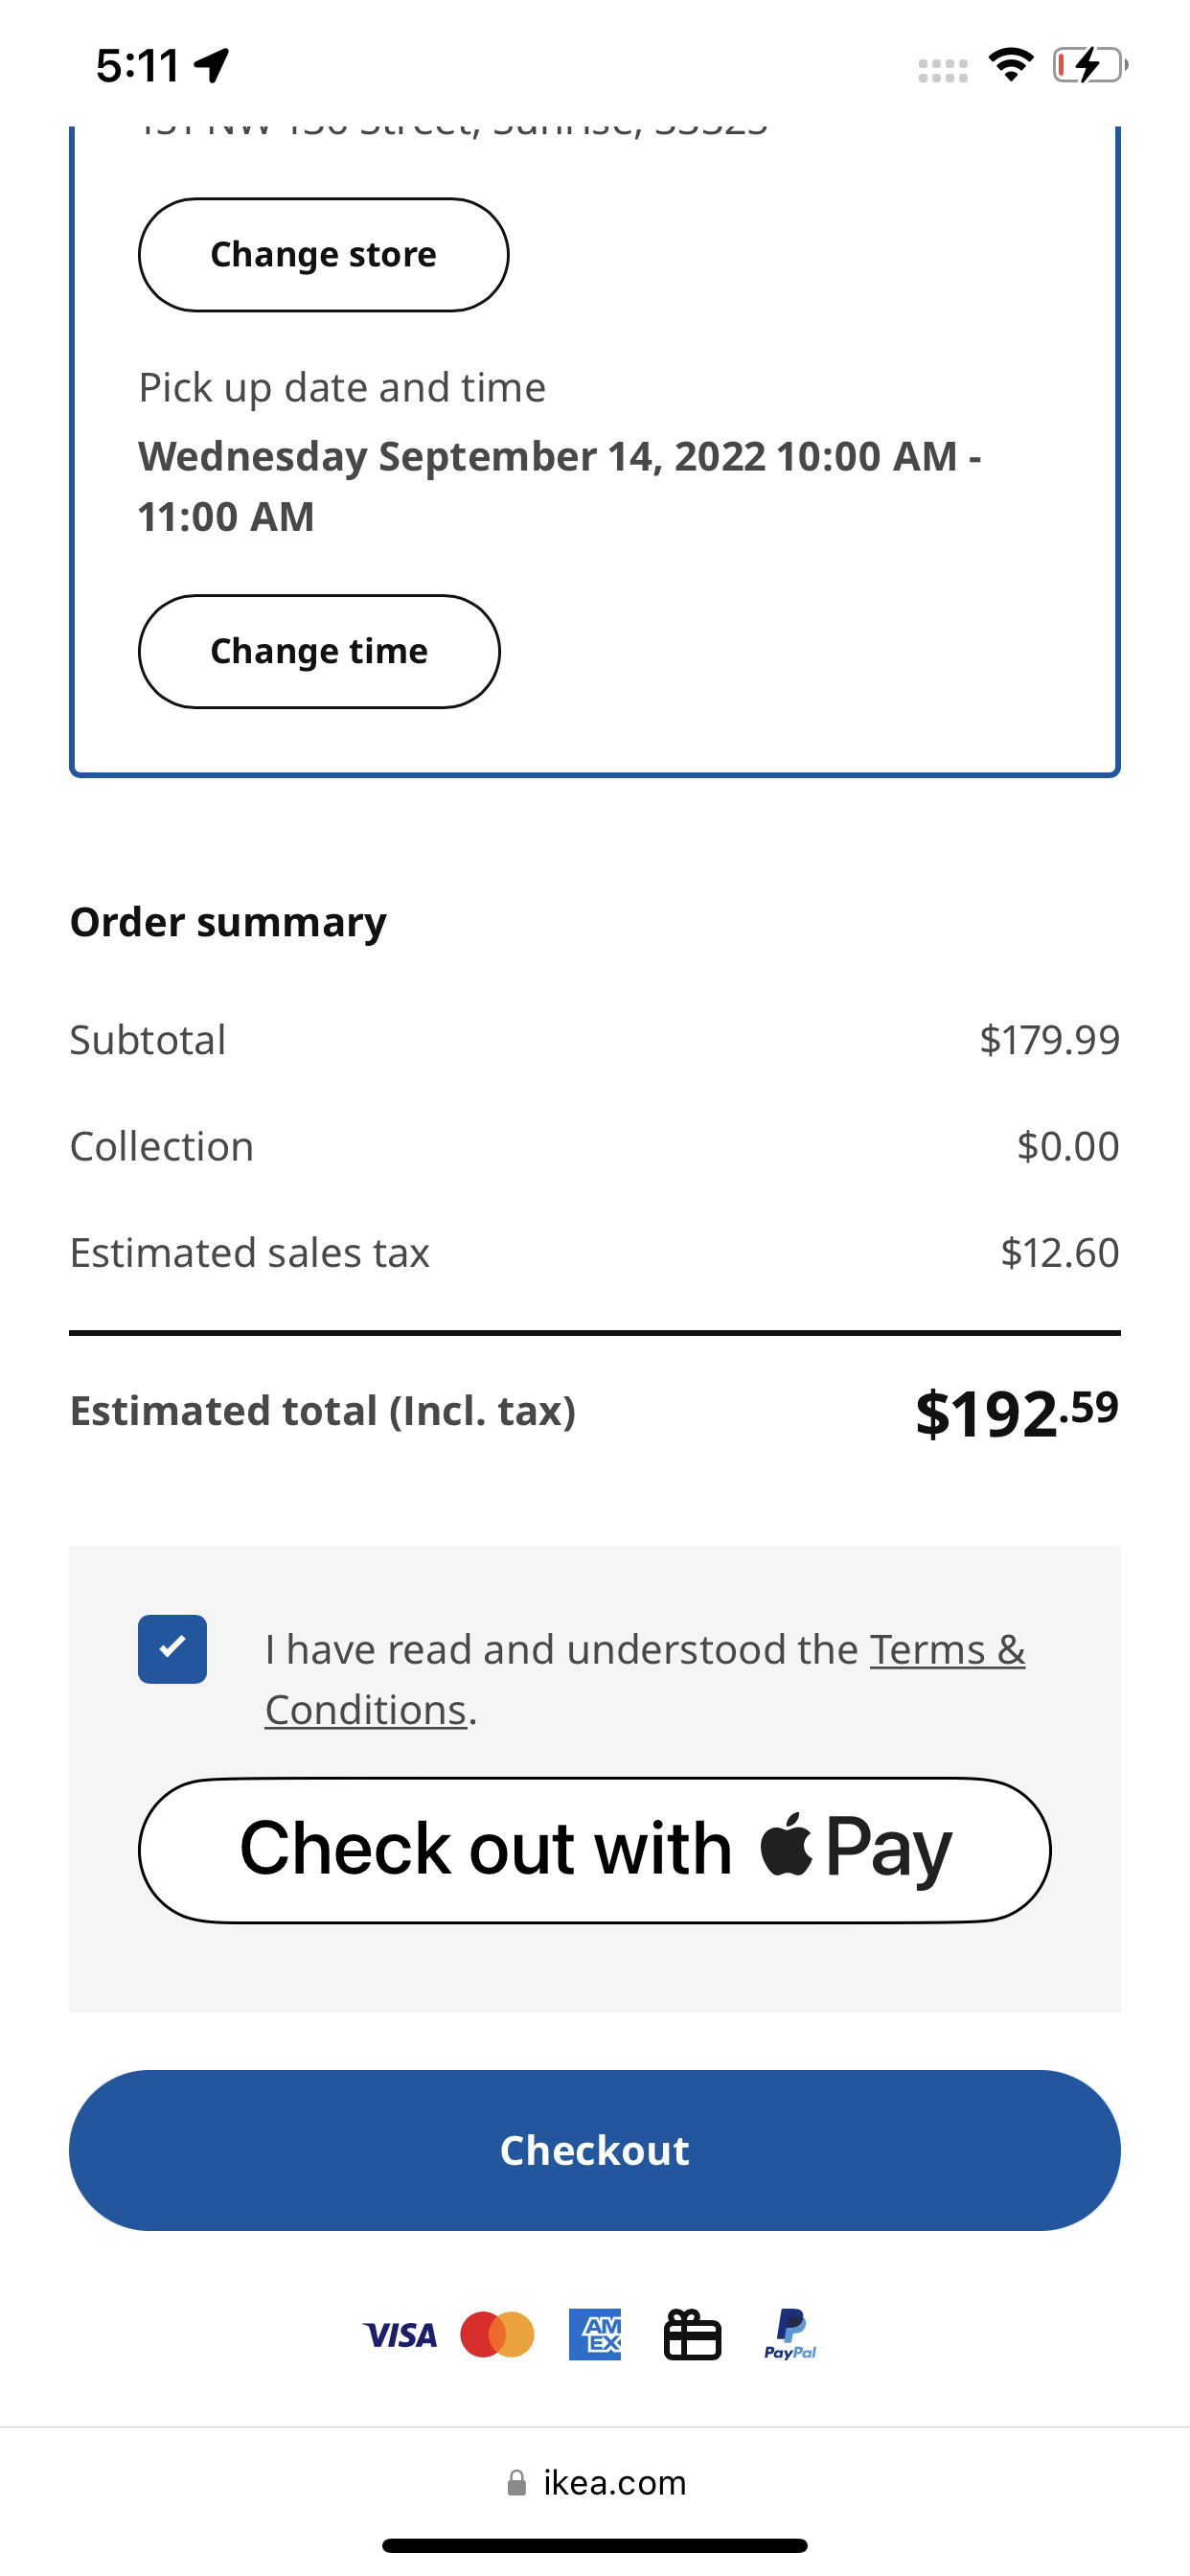 IKEA accepts Apple Pay on its website.